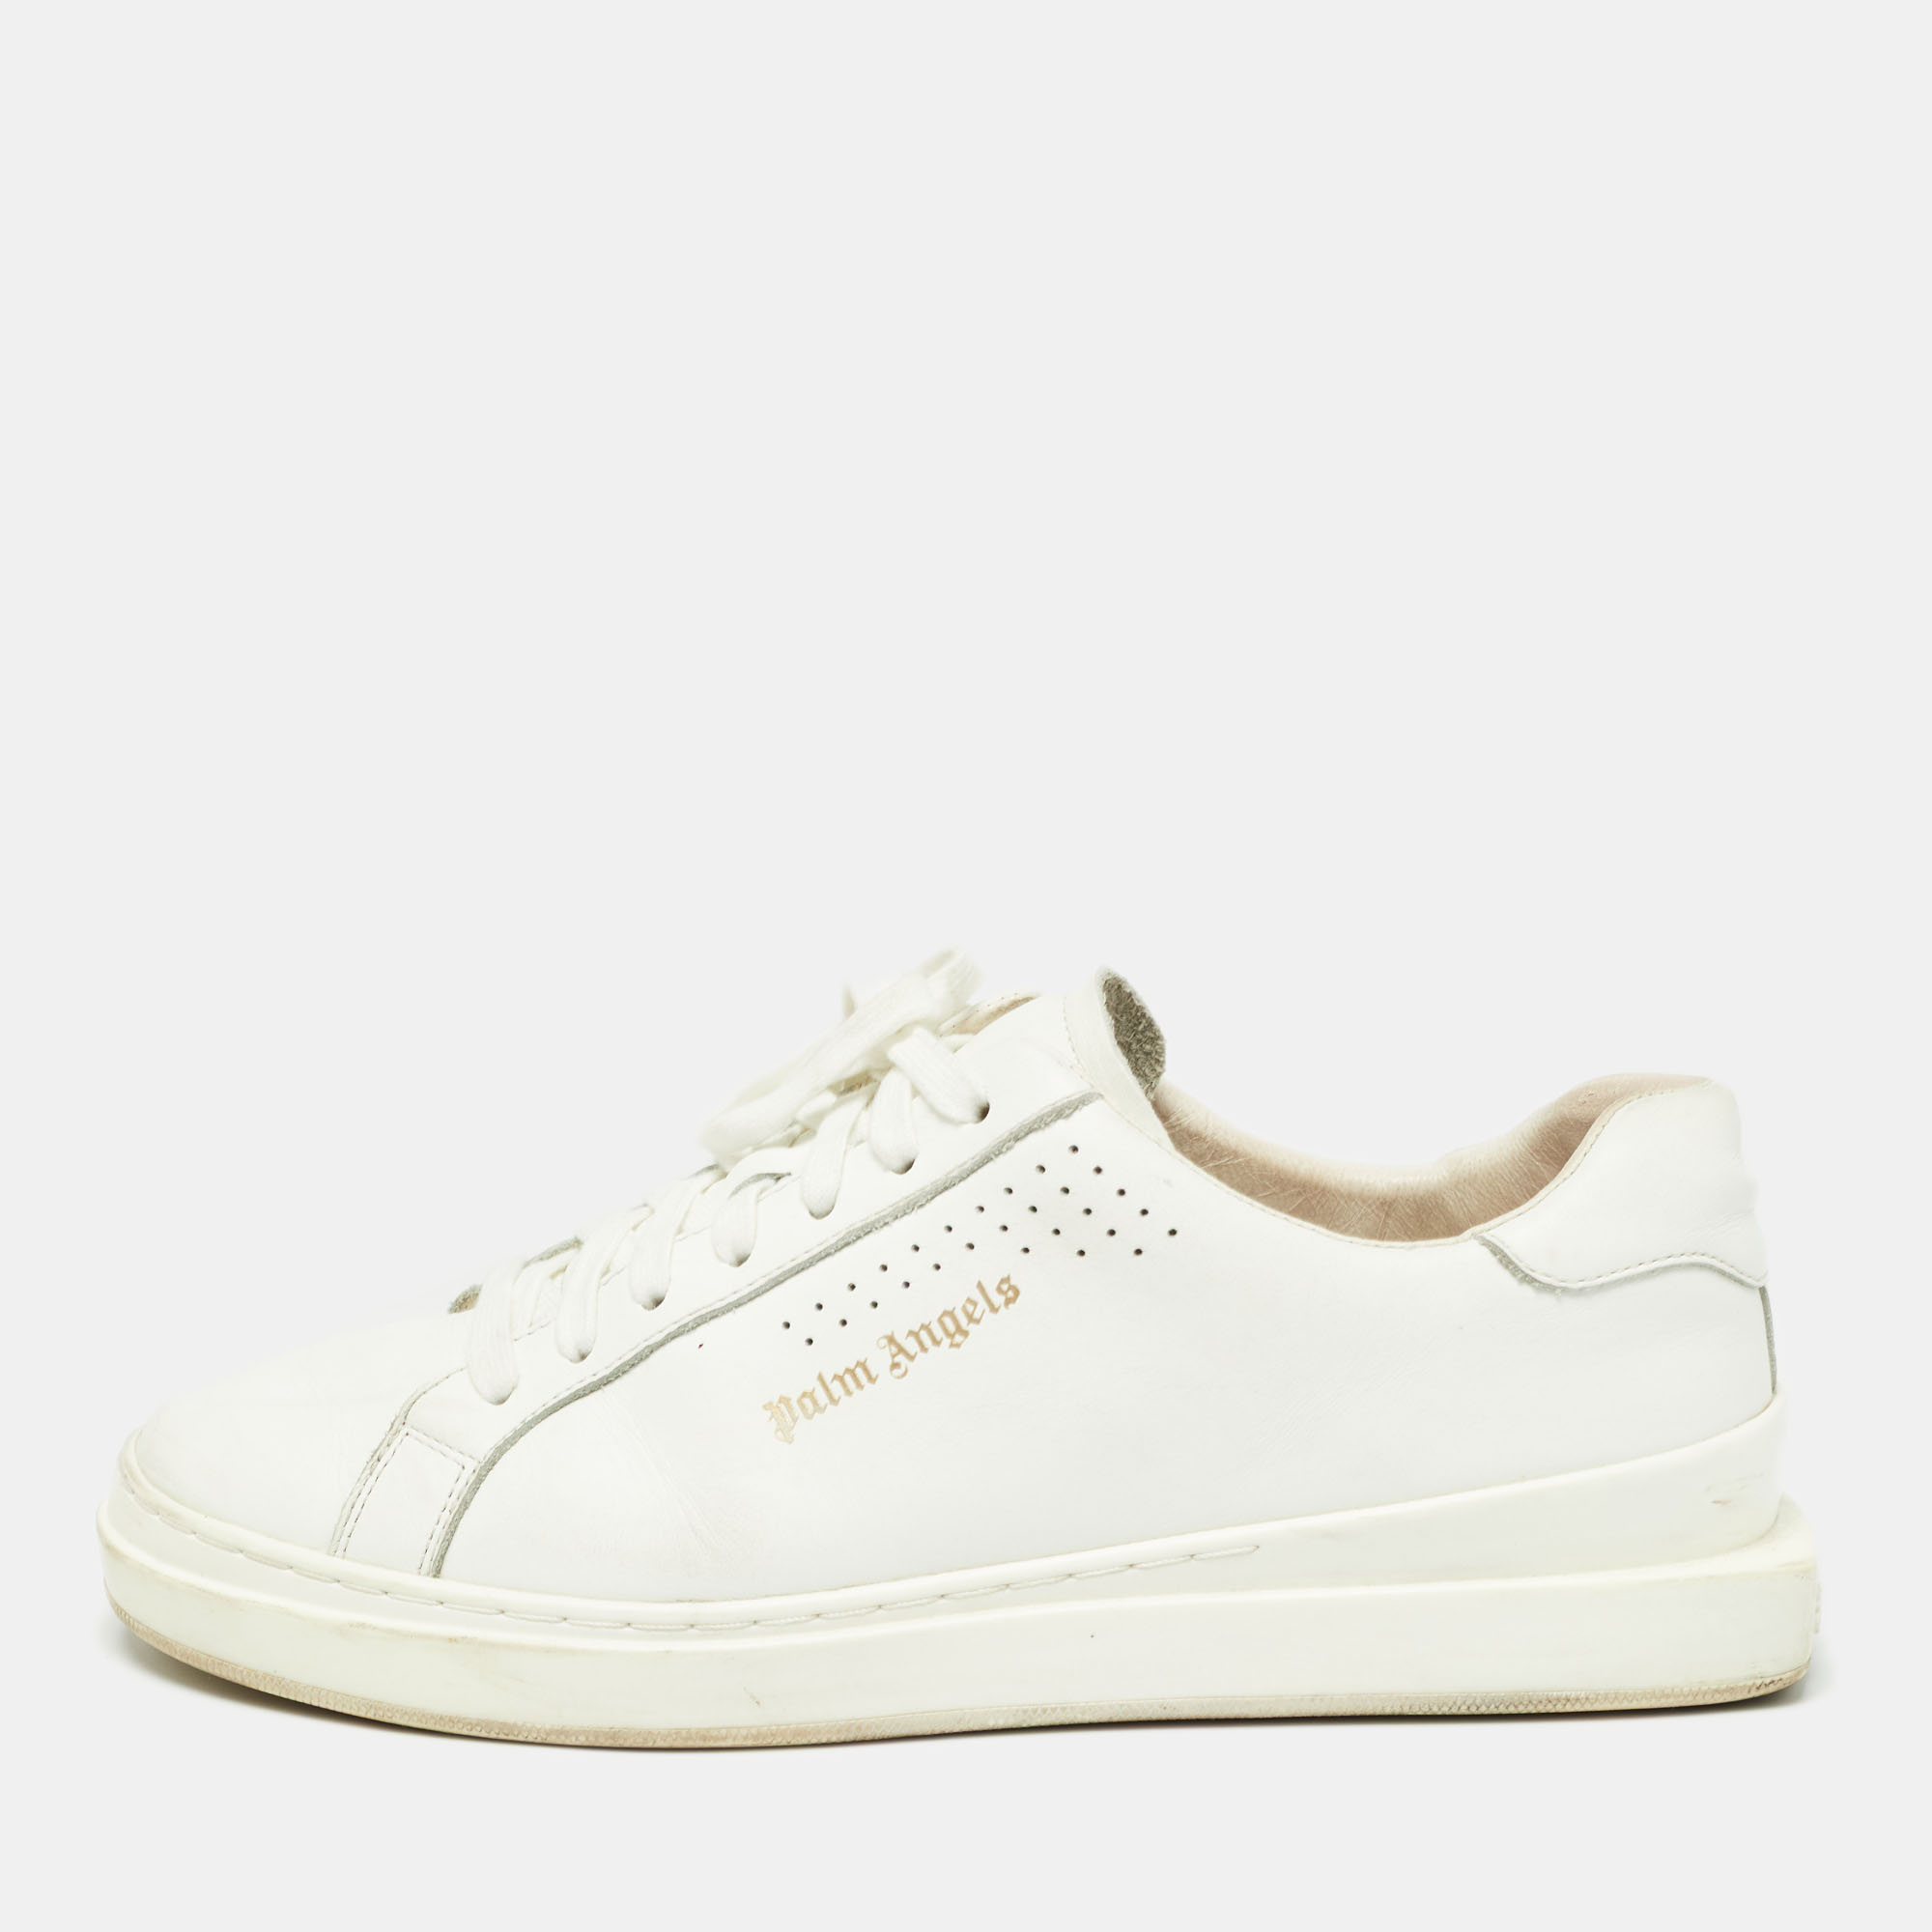 Palm angels white leather two low top sneakers size 45